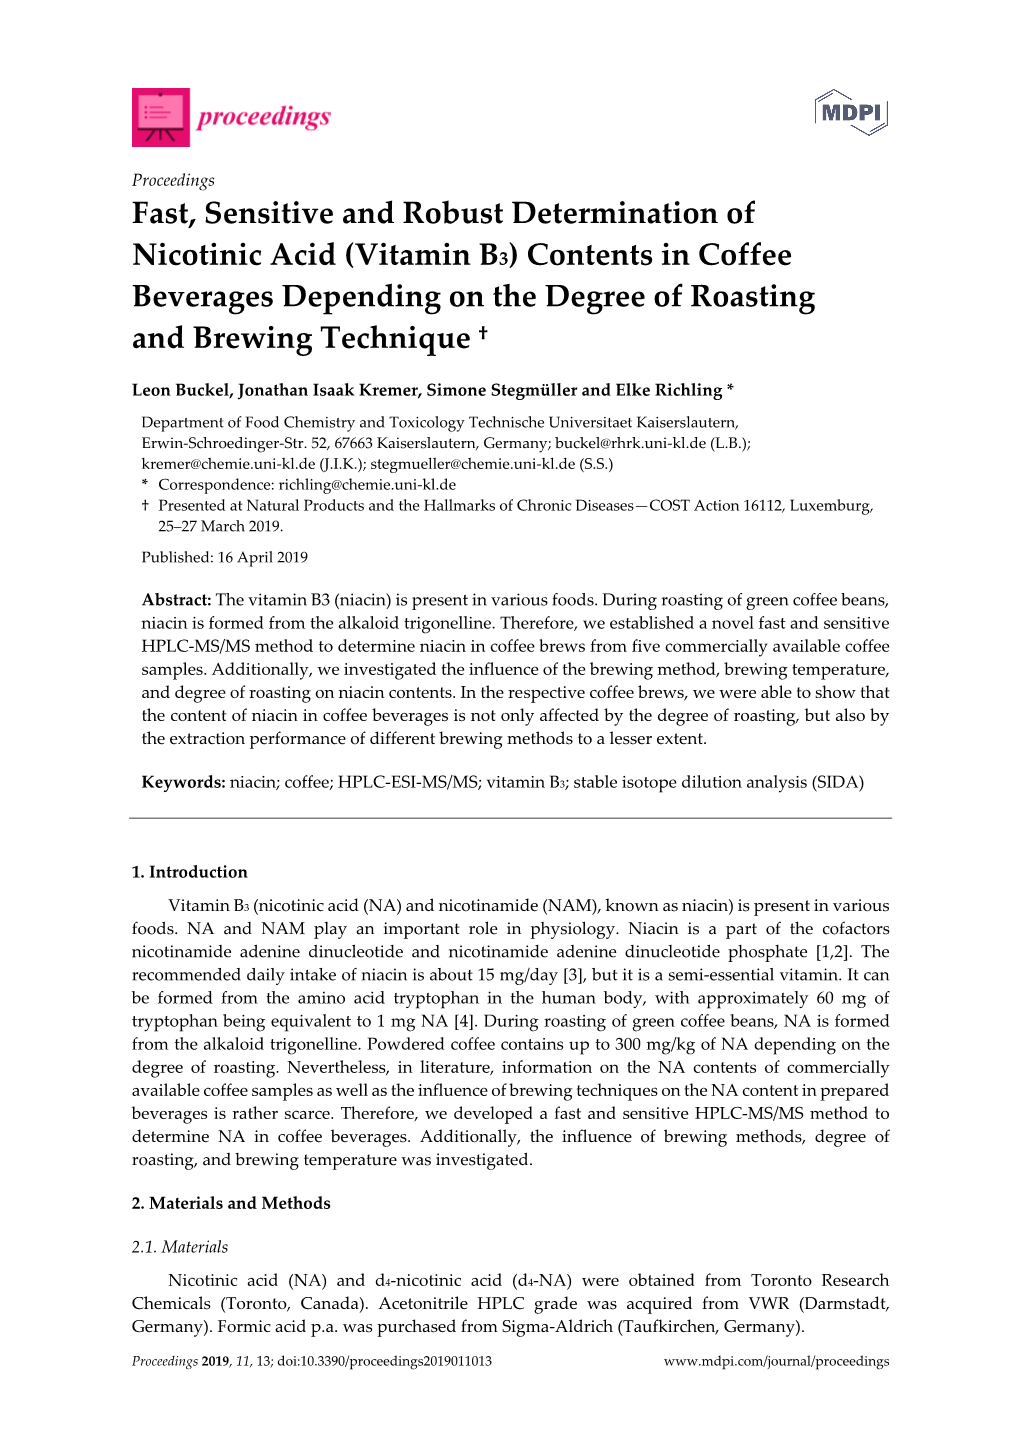 Fast, Sensitive and Robust Determination of Nicotinic Acid (Vitamin B3) Contents in Coffee Beverages Depending on the Degree of Roasting and Brewing Technique †